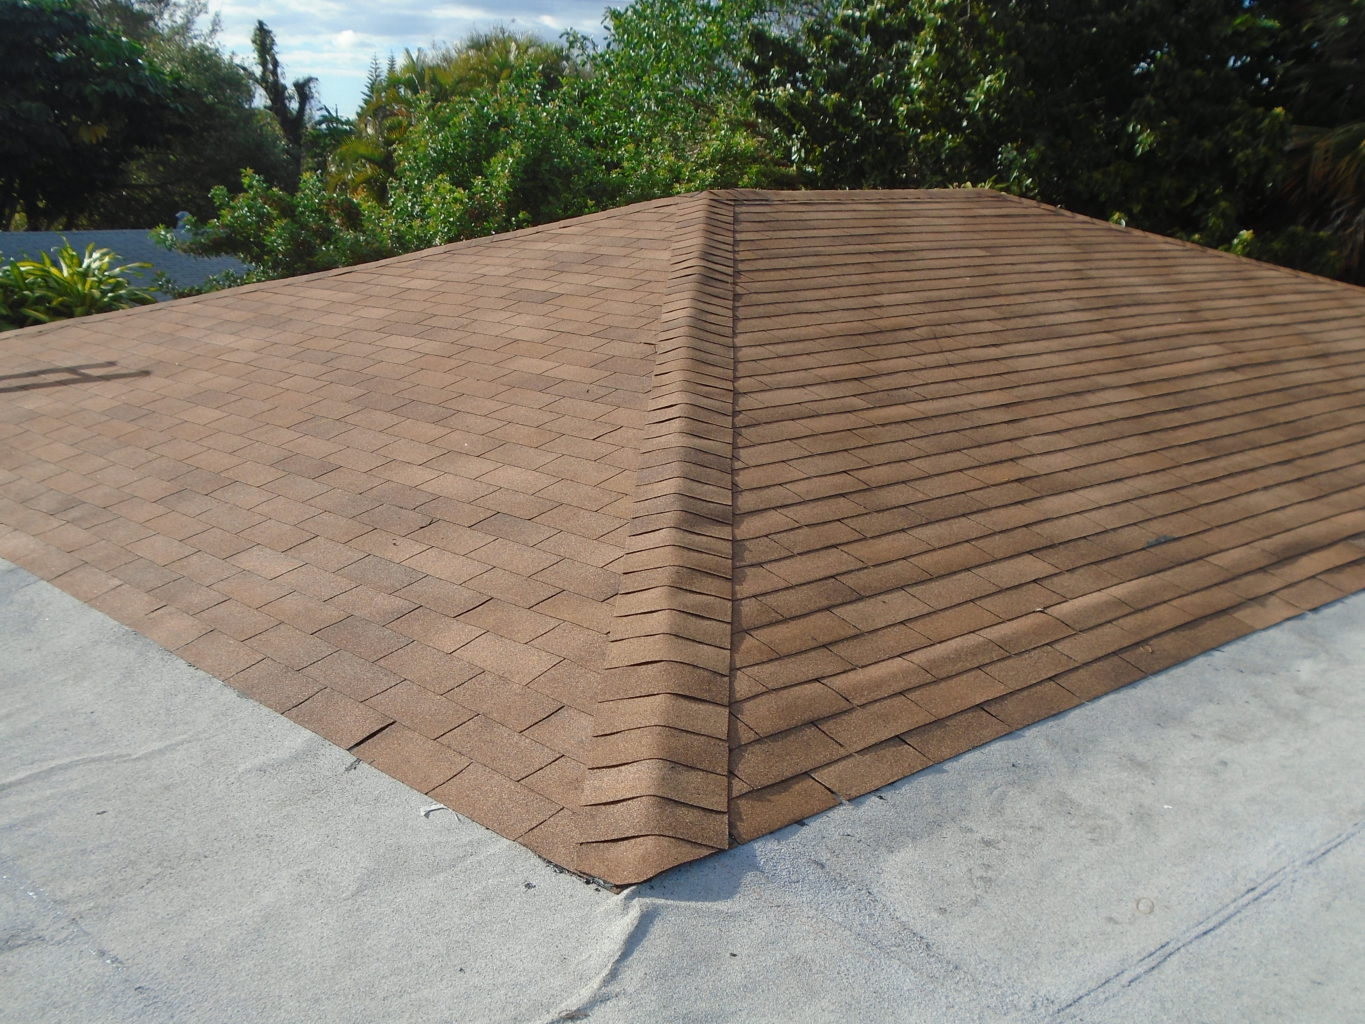 New Shingle And Flat Roof In Miami Gardens Roof Repairs And New Roofs In